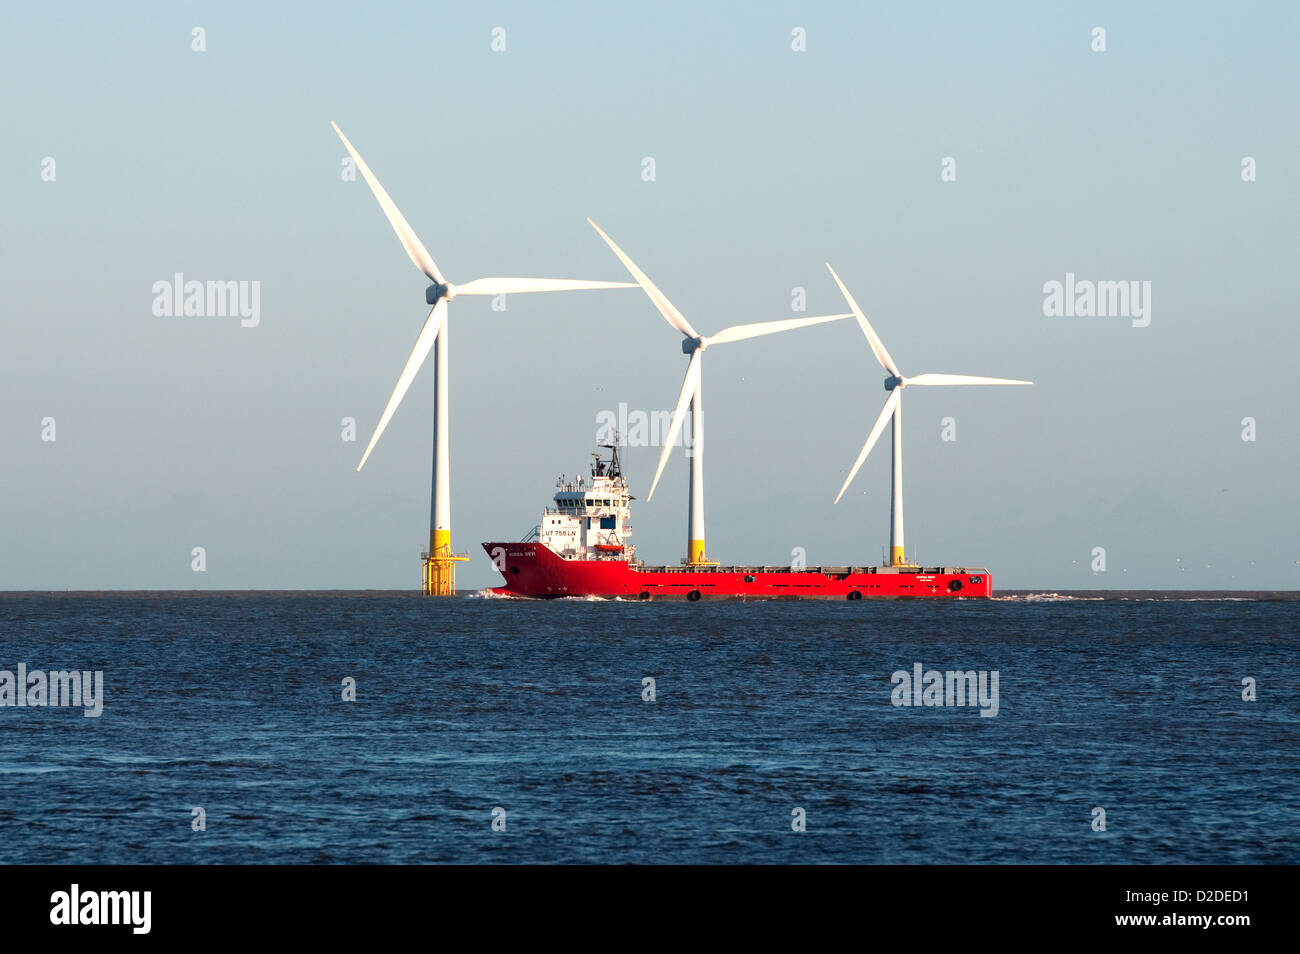 The Durga Devi offshore vessel, in front of the wind turbines on Scroby Sands off the coast of Great Yarmouth, Norfolk, England Stock Photo